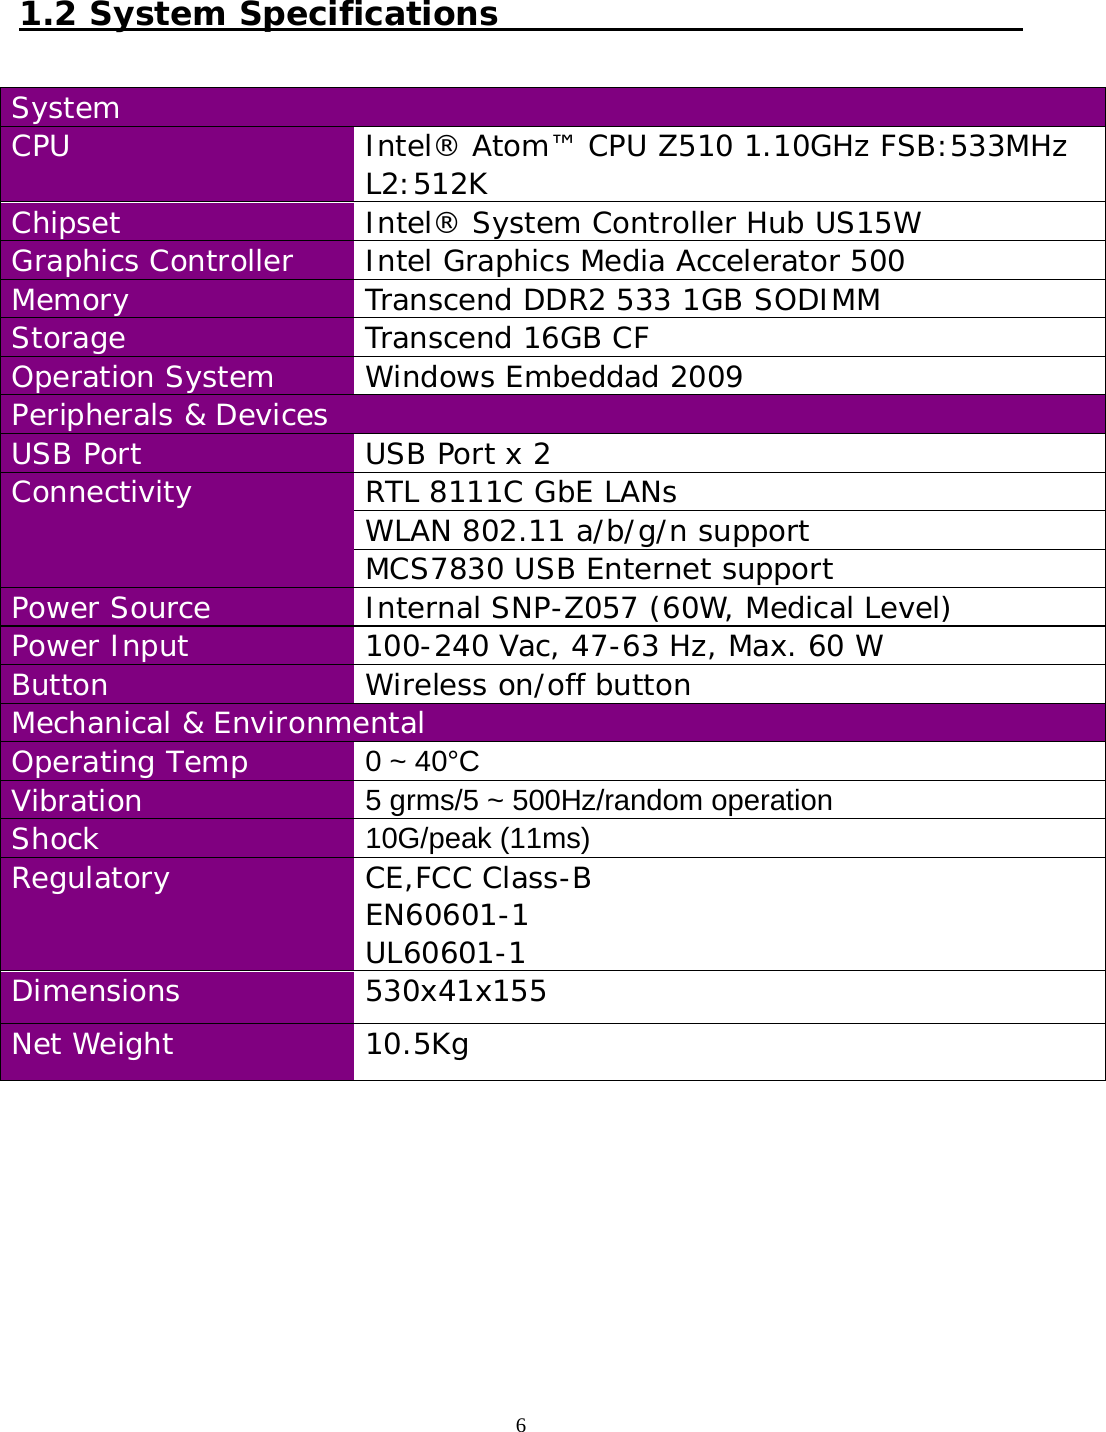  6  1.2 System Specifications                                               System CPU  Intel® Atom™ CPU Z510 1.10GHz FSB:533MHz L2:512K Chipset Intel® System Controller Hub US15W Graphics Controller Intel Graphics Media Accelerator 500 Memory Transcend DDR2 533 1GB SODIMM Storage Transcend 16GB CF Operation System Windows Embeddad 2009 Peripherals &amp; Devices USB Port USB Port x 2 Connectivity RTL 8111C GbE LANs WLAN 802.11 a/b/g/n support MCS7830 USB Enternet support Power Source Internal SNP-Z057 (60W, Medical Level) Power Input 100-240 Vac, 47-63 Hz, Max. 60 W Button Wireless on/off button Mechanical &amp; Environmental Operating Temp 0 ~ 40°C   Vibration 5 grms/5 ~ 500Hz/random operation Shock 10G/peak (11ms) Regulatory CE,FCC Class-B EN60601-1 UL60601-1  Dimensions 530x41x155 Net Weight 10.5Kg         